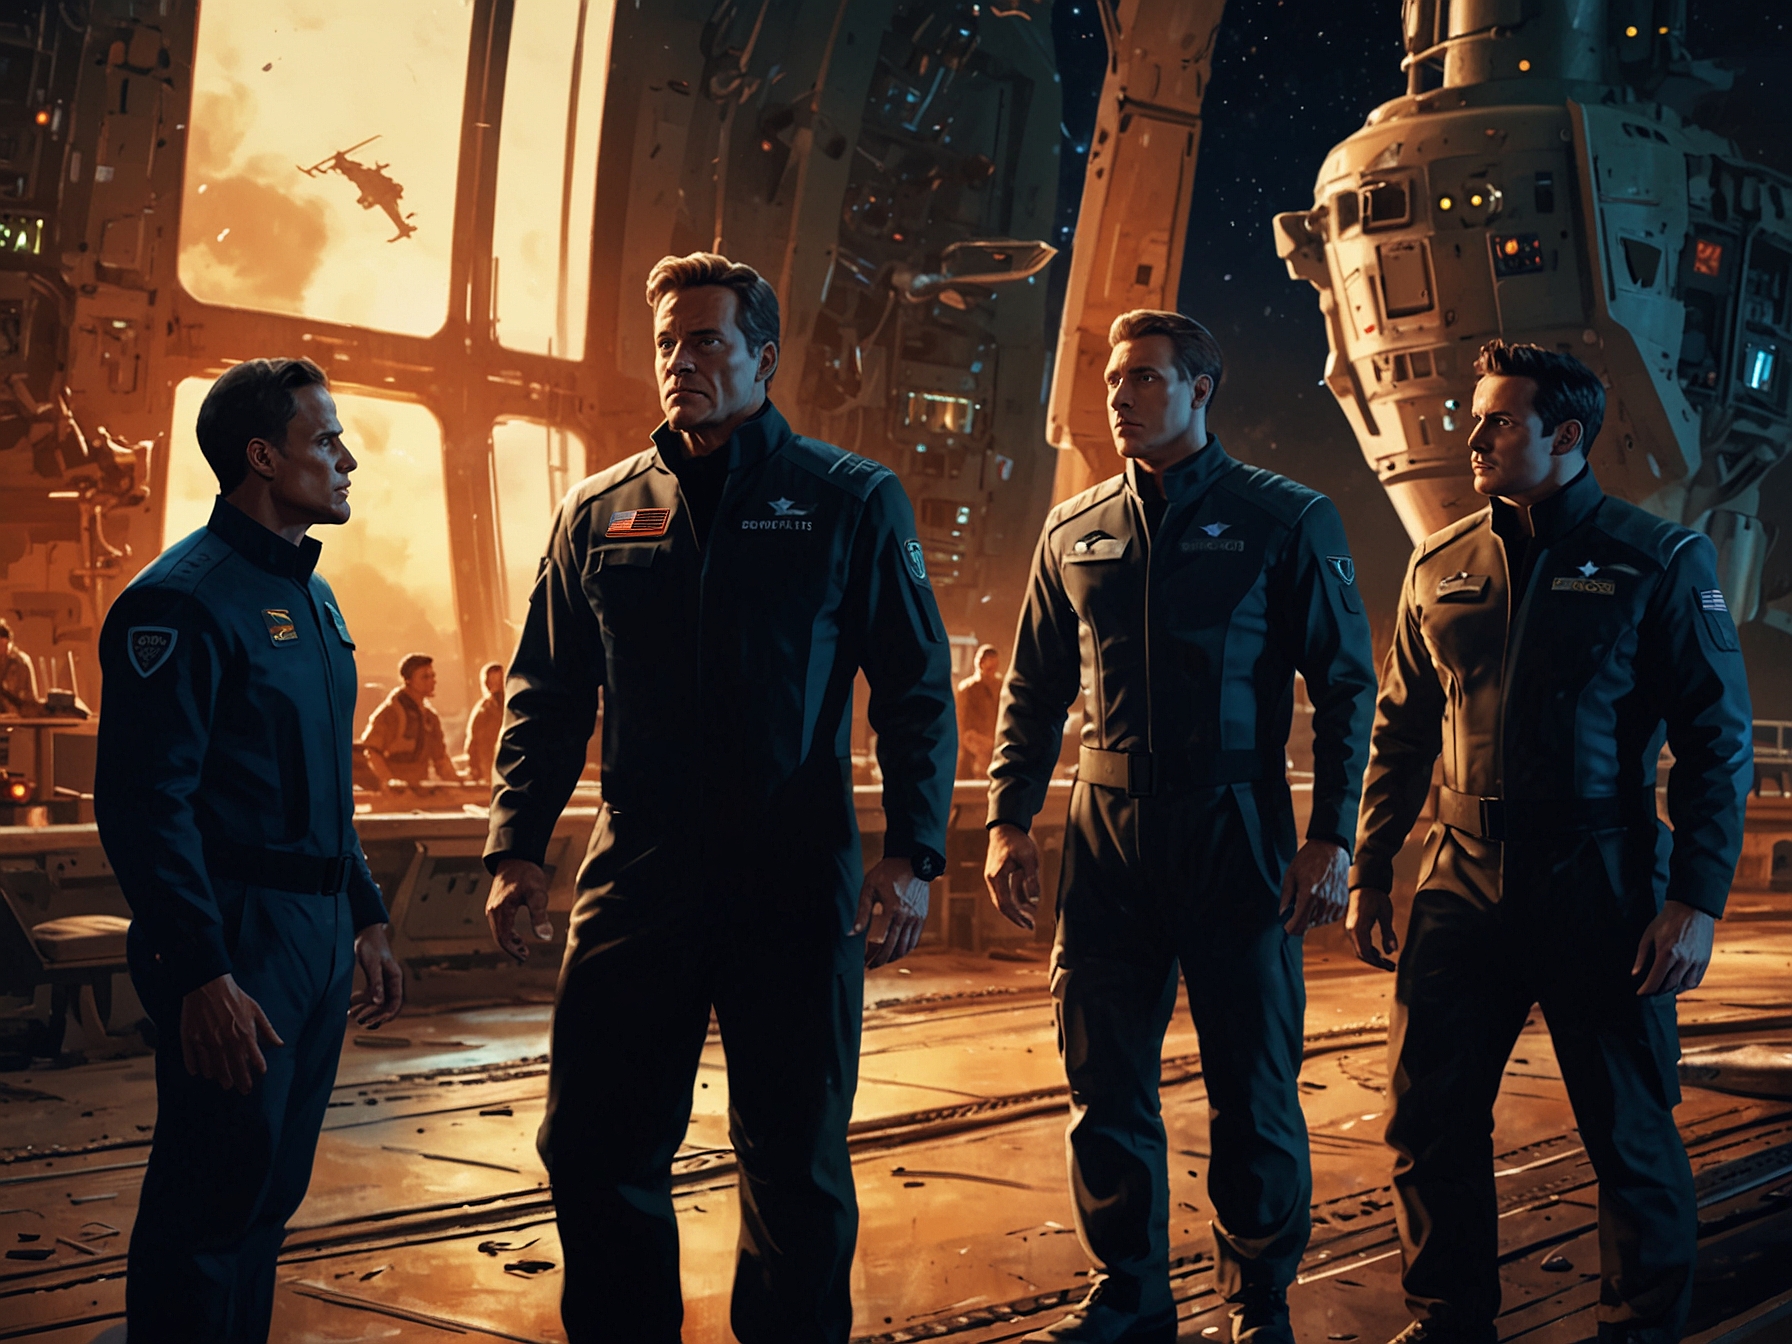 A vibrant scene showing the main crew of the U.S.S. Cerritos in action, including Mariner, Boimler, Tendi, and Rutherford, symbolizing their growth and camaraderie as they prepare for high-stakes missions in Season 5.